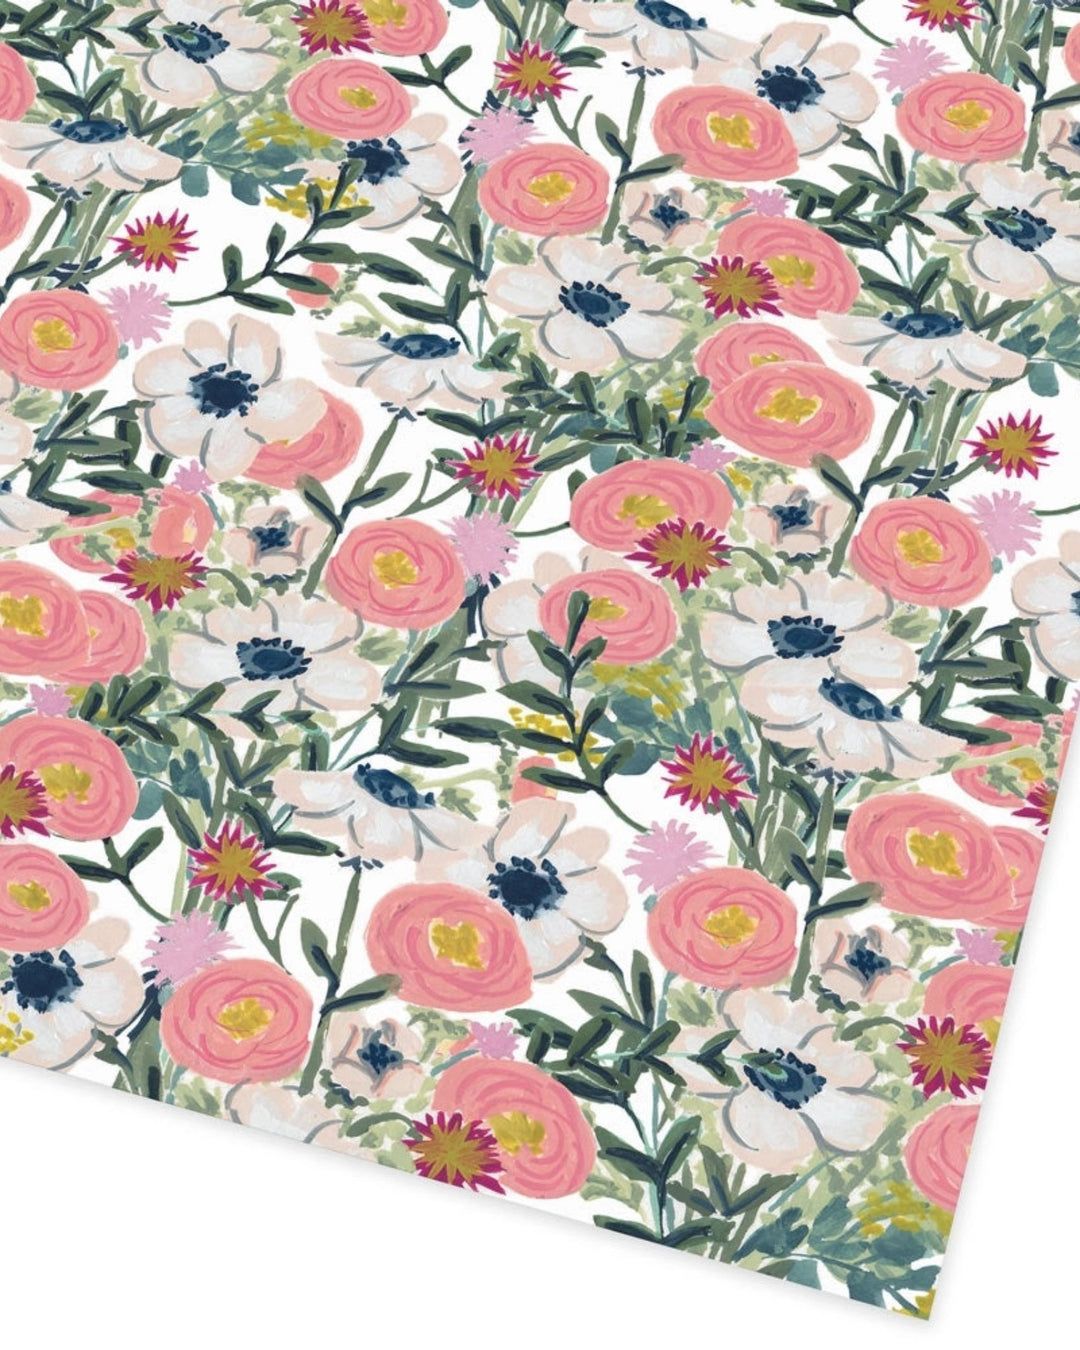 Floral recycled paper gift wrap